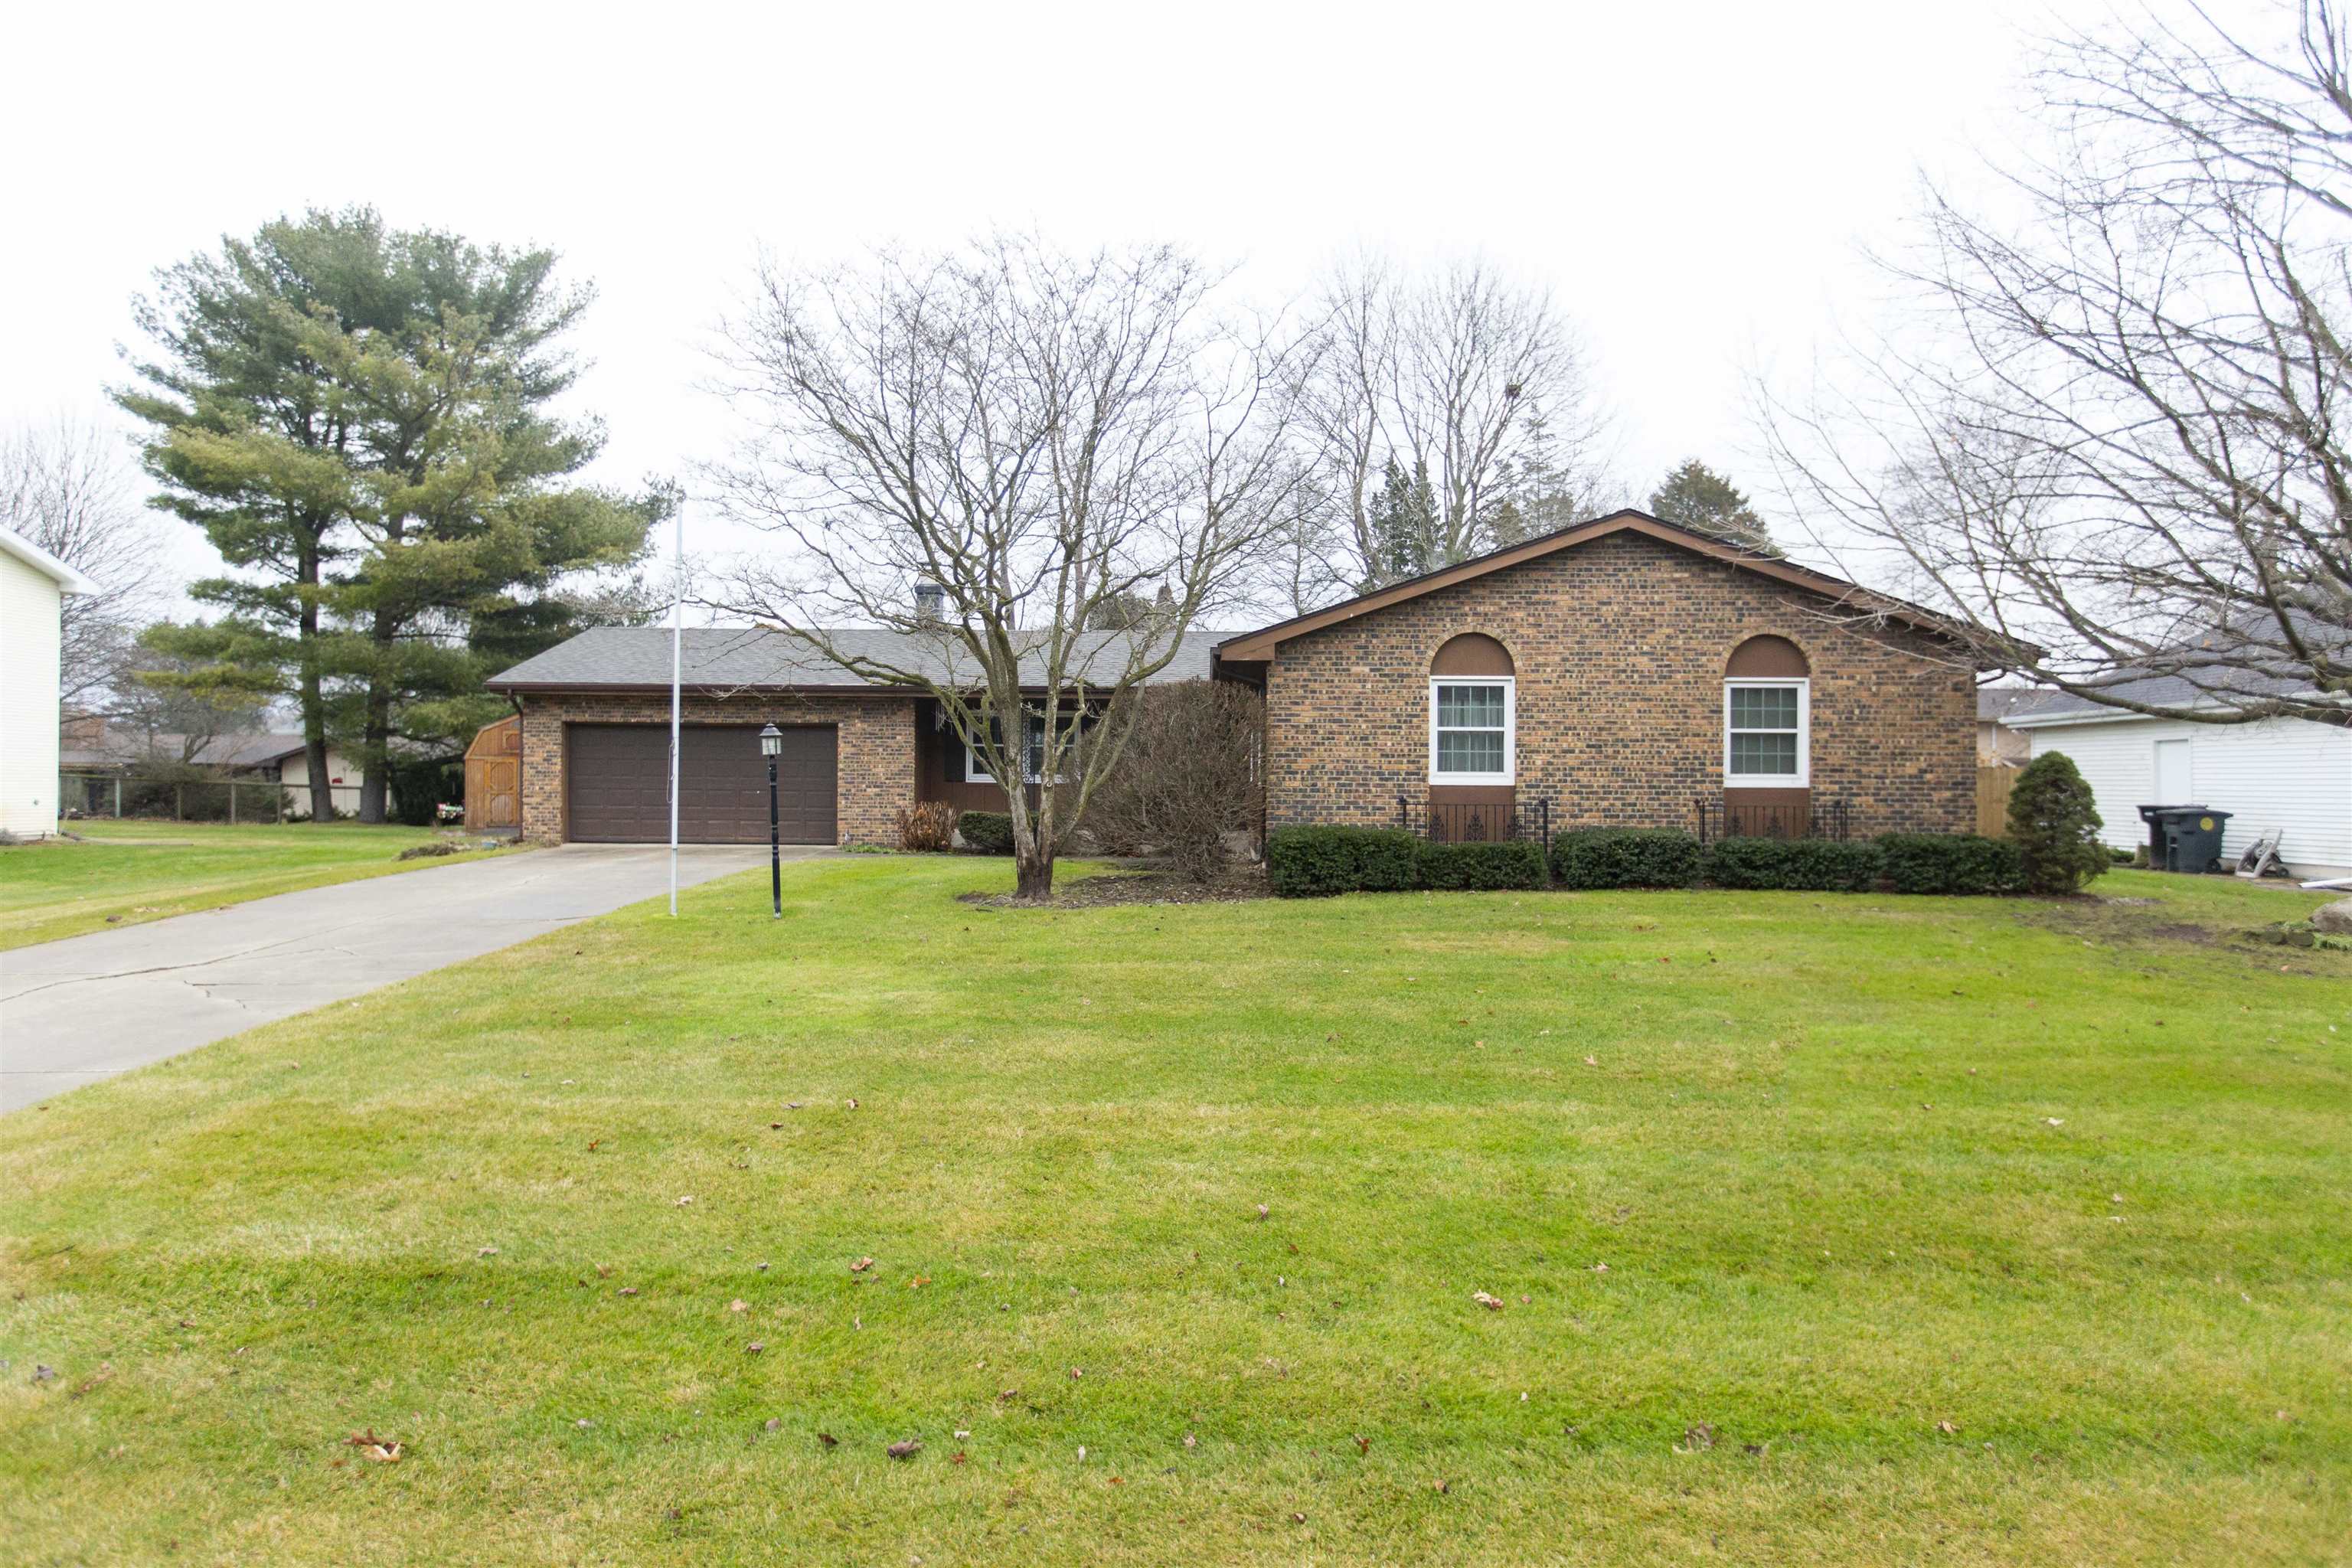 51812 Whitestable Lane, South Bend, IN 46637